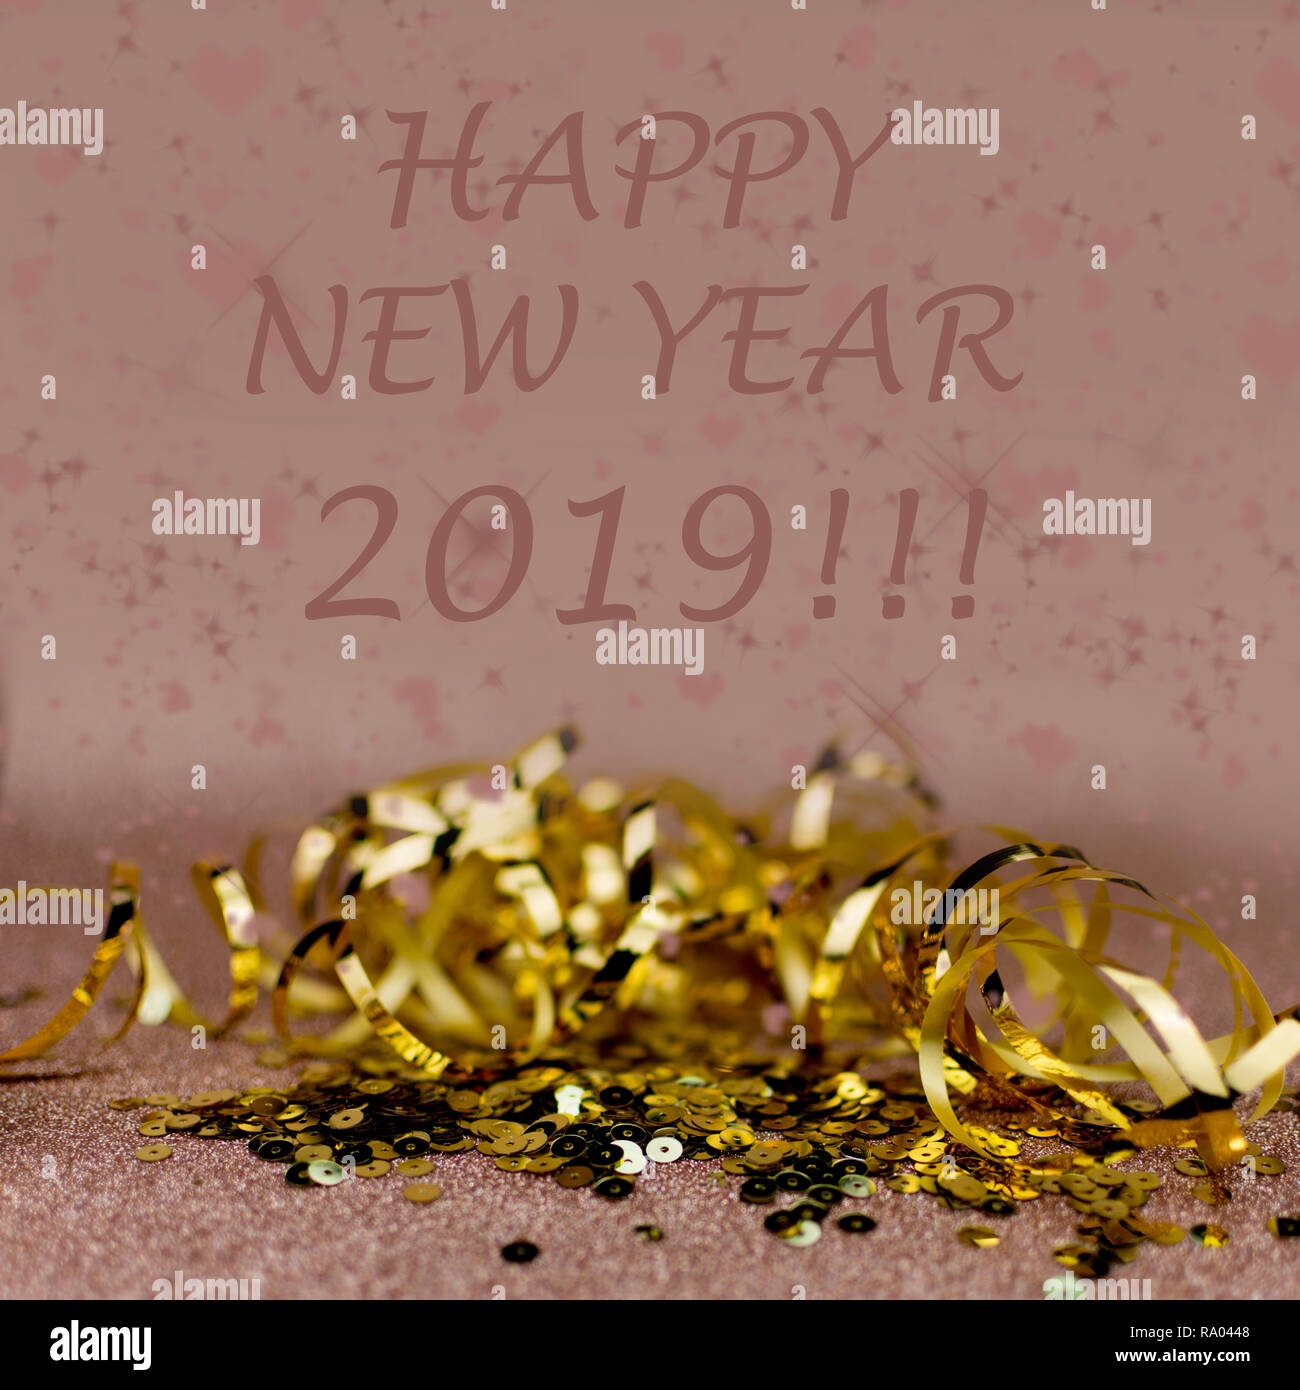 New Year 2019 greetings card. Golden ribboon and sequins on warn soft pink background. Stock Photo